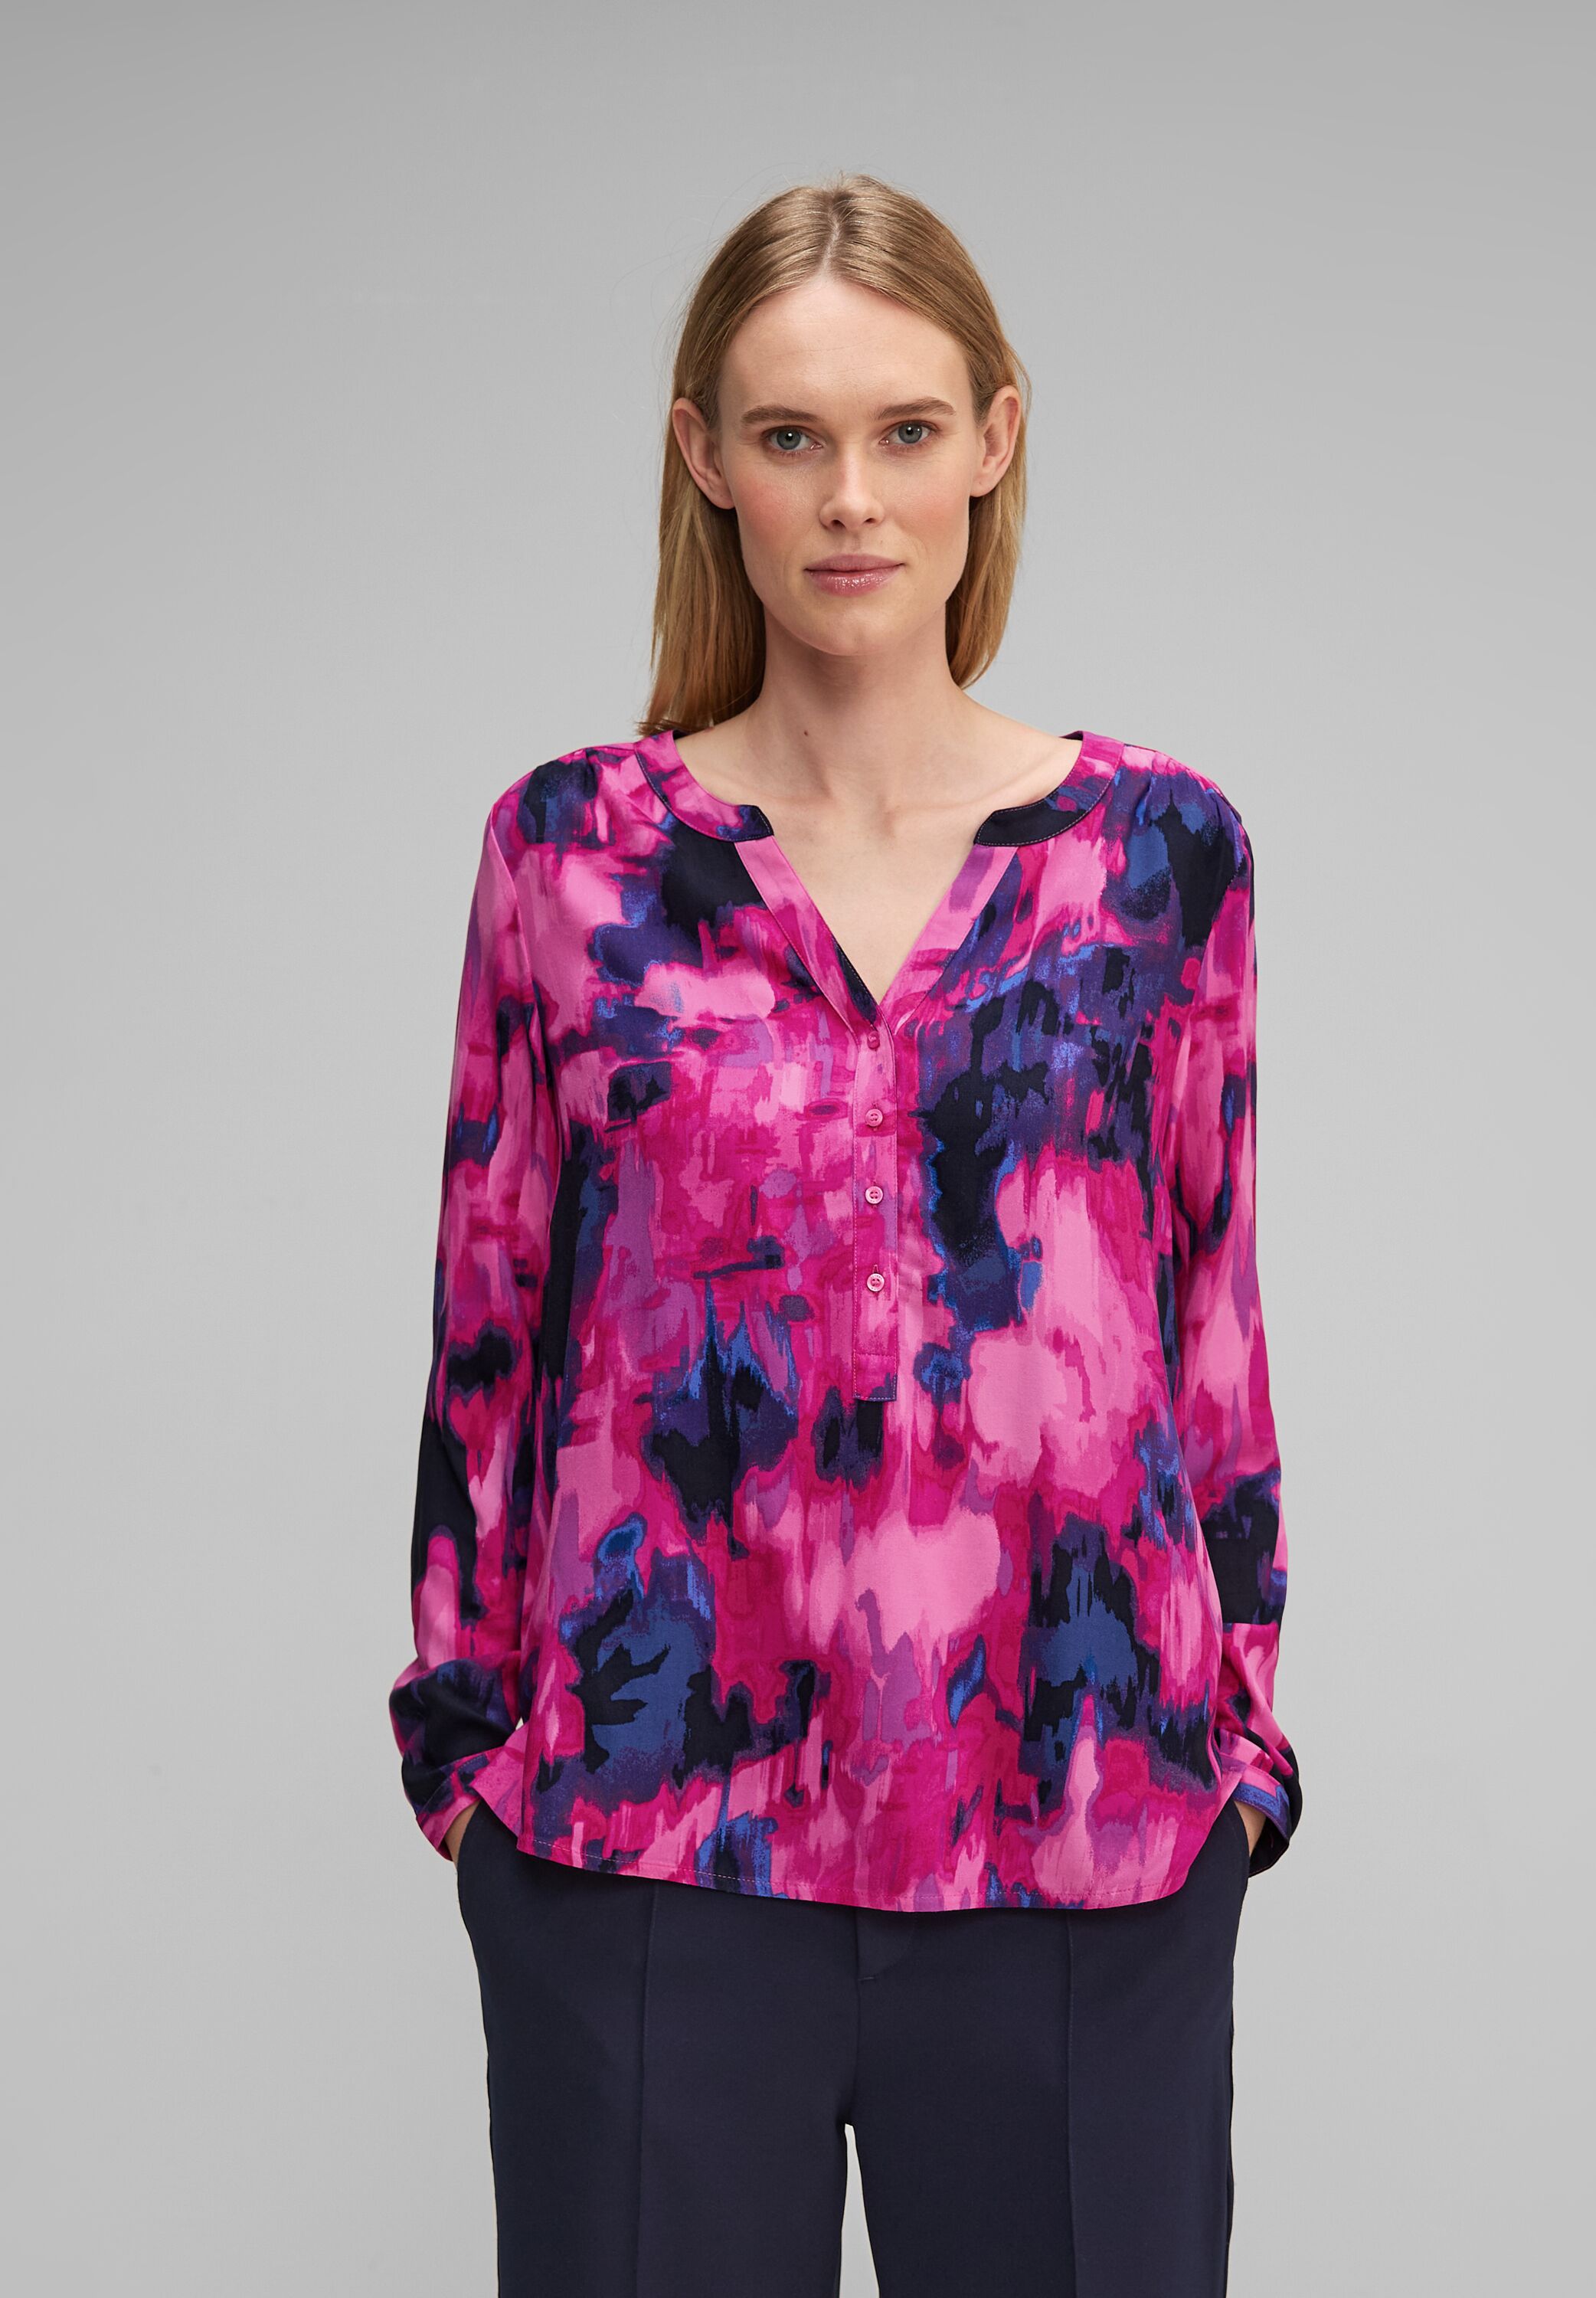 Street One Bamika CONCEPT Bright SALE in Cozy Mode A344378-35463 reduziert - im Rundhalsbluse Pink